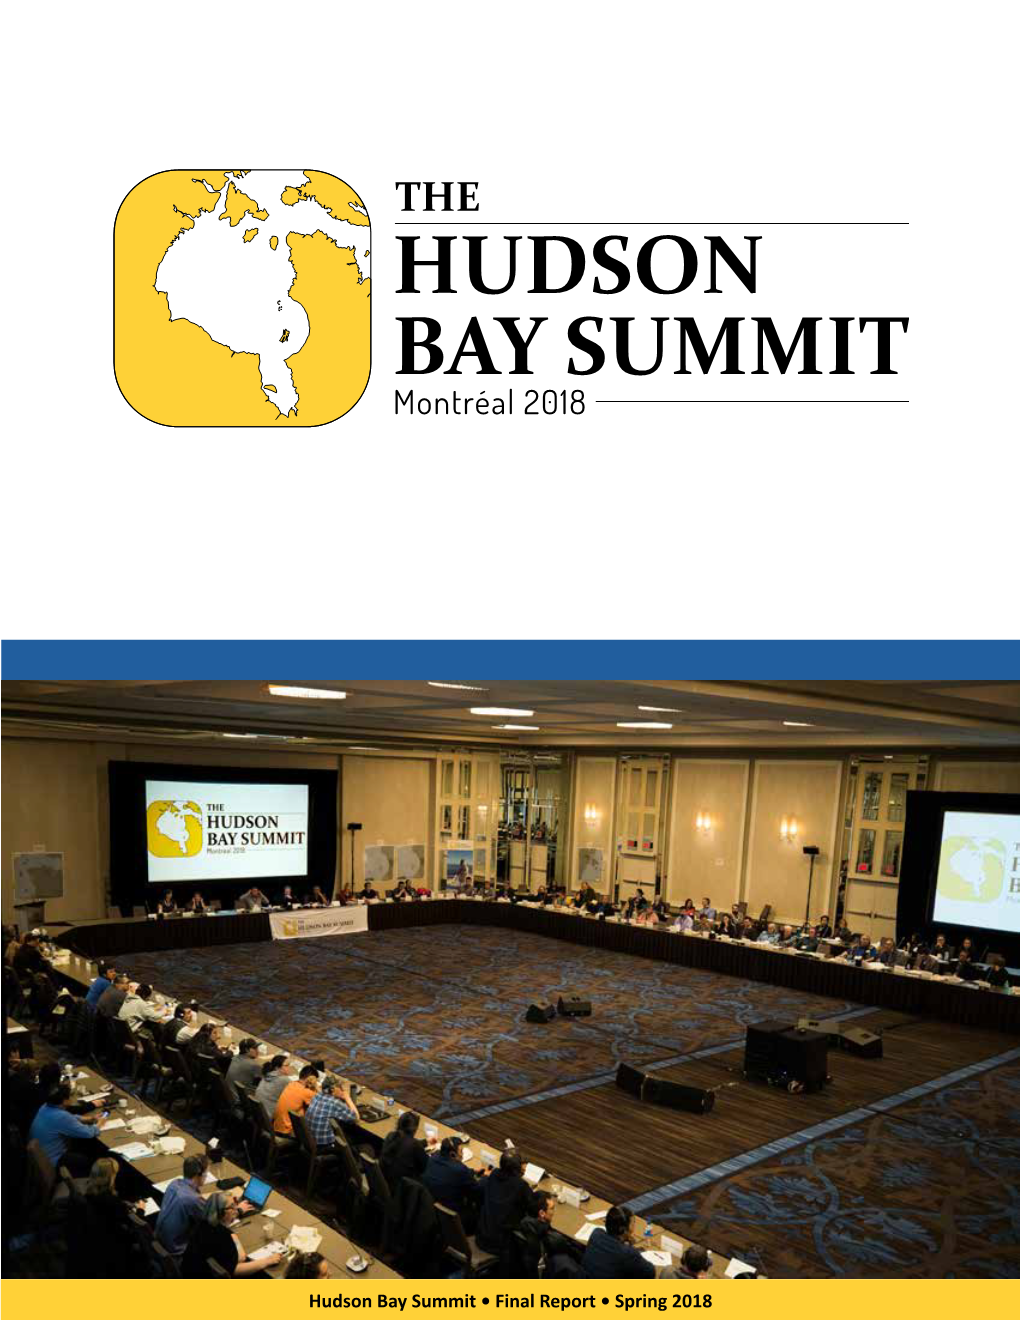 Hudson Bay Summit • Final Report • Spring 2018 Contents